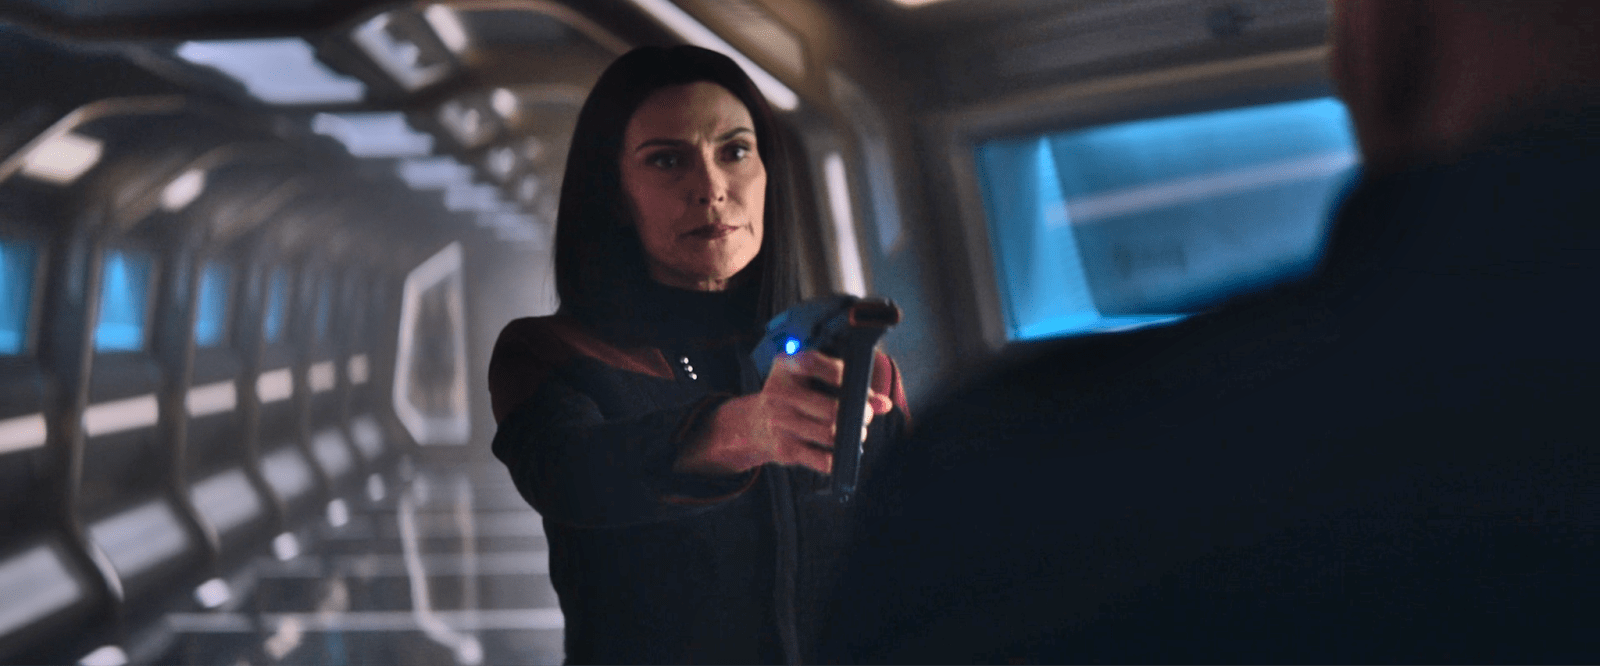 Image of Michelle Forbes as Ro Laren on 'Star Trek: Picard.' She stands in a ship corridor pointing a phaser at someone. Her shoulder-length dark hair is parted in the middle. She's wearing a black Starfleet uniform with dark red shoulders.